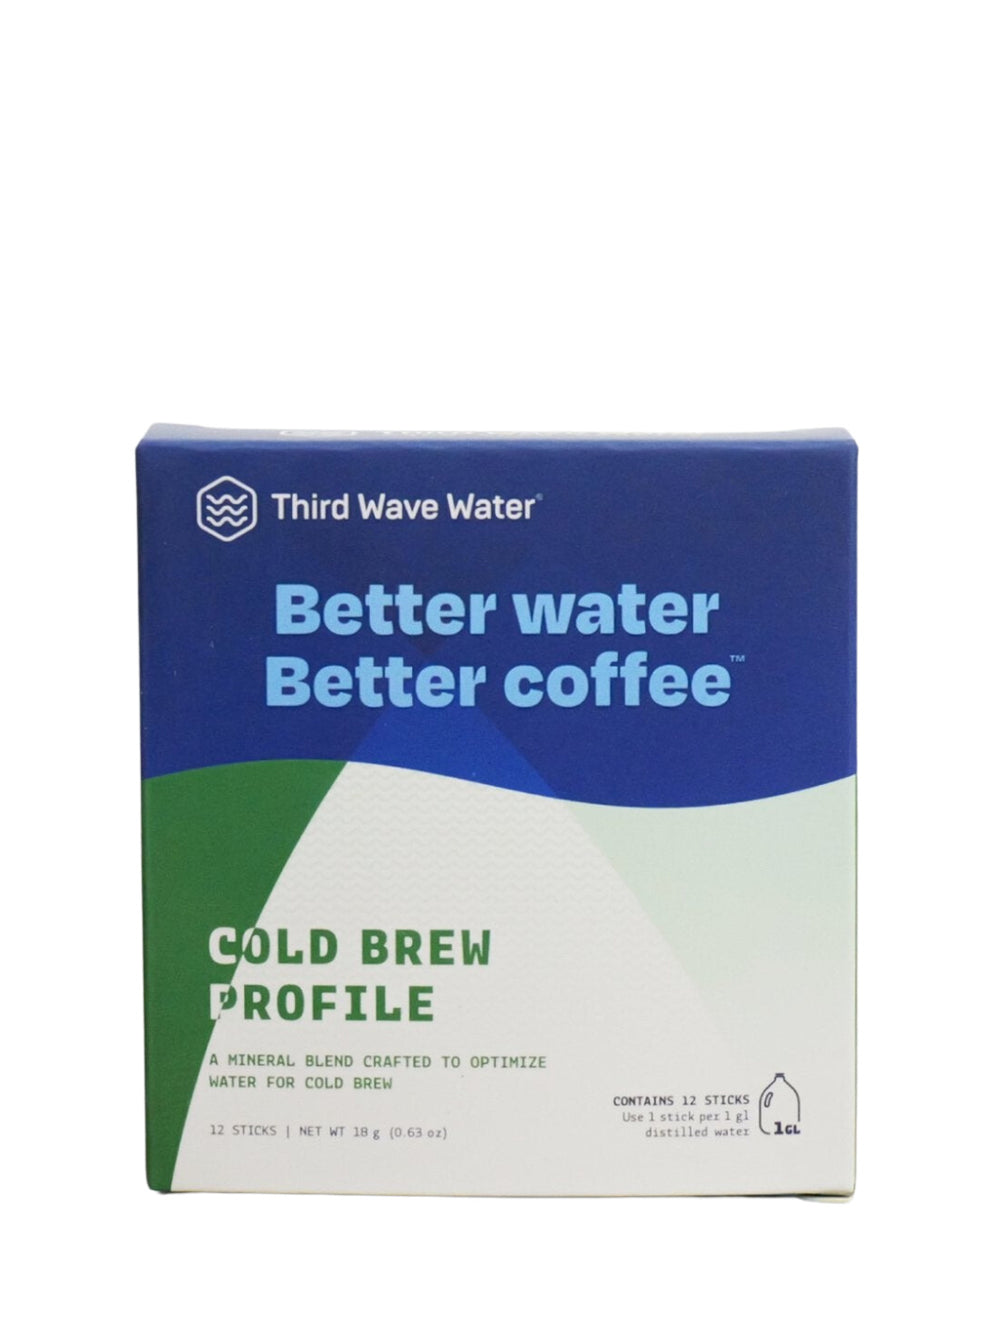 Photo of THIRD WAVE WATER Cold Brew Profile ( 1 Gallon ) [ Third Wave Water ] [ Water Enhancement ]